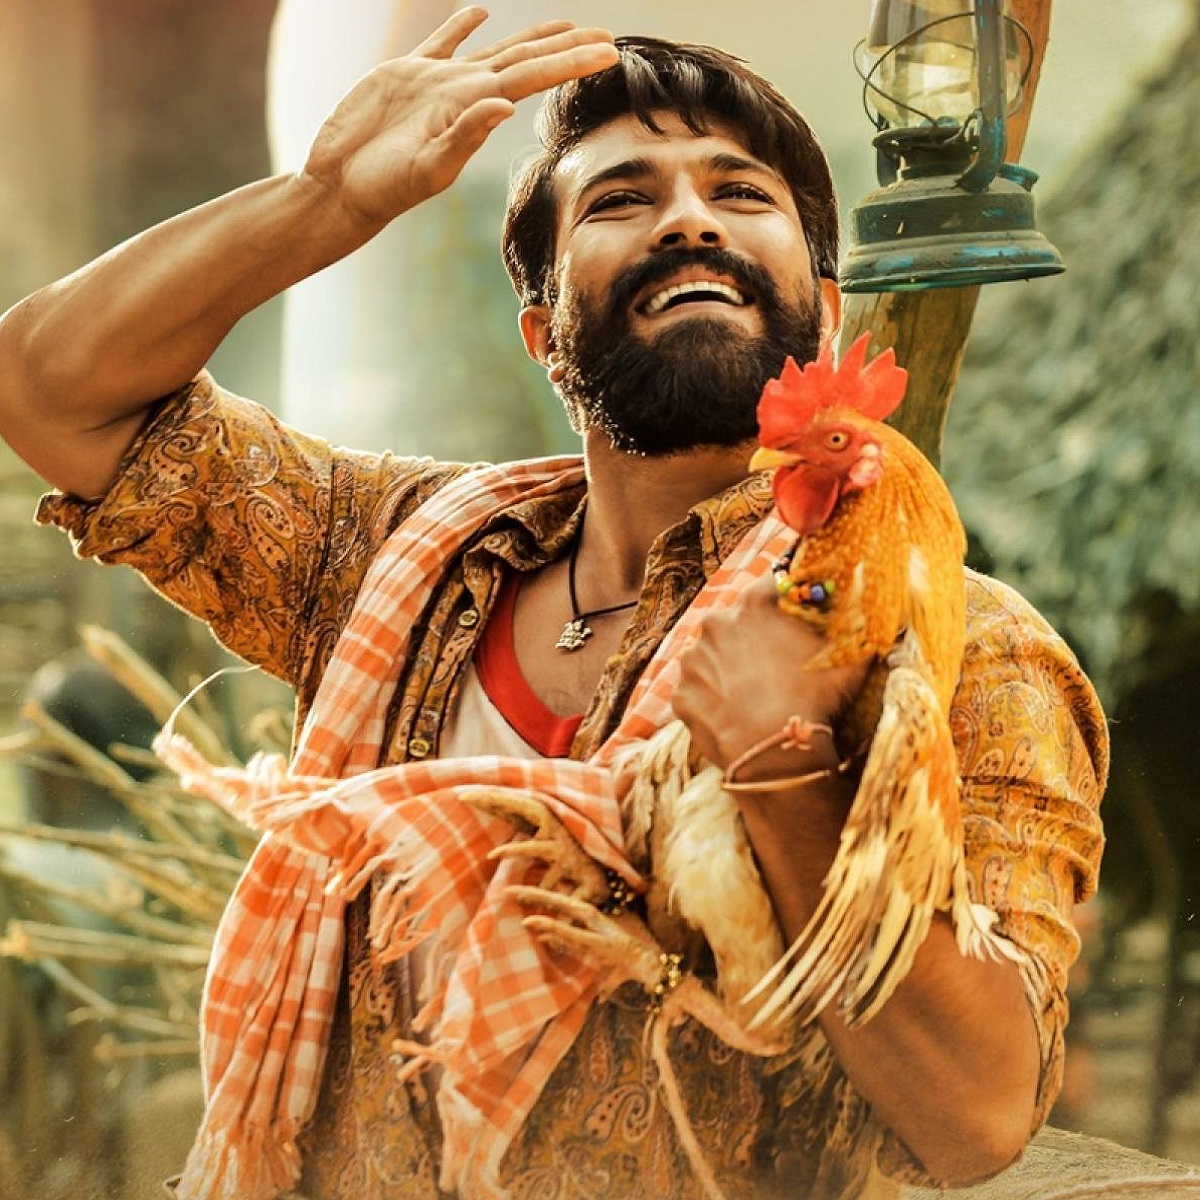 EXCLUSIVE: Ram Charan's Rangasthalam ready for theatrical release in Hindi; Mersal & Viswasam expected too